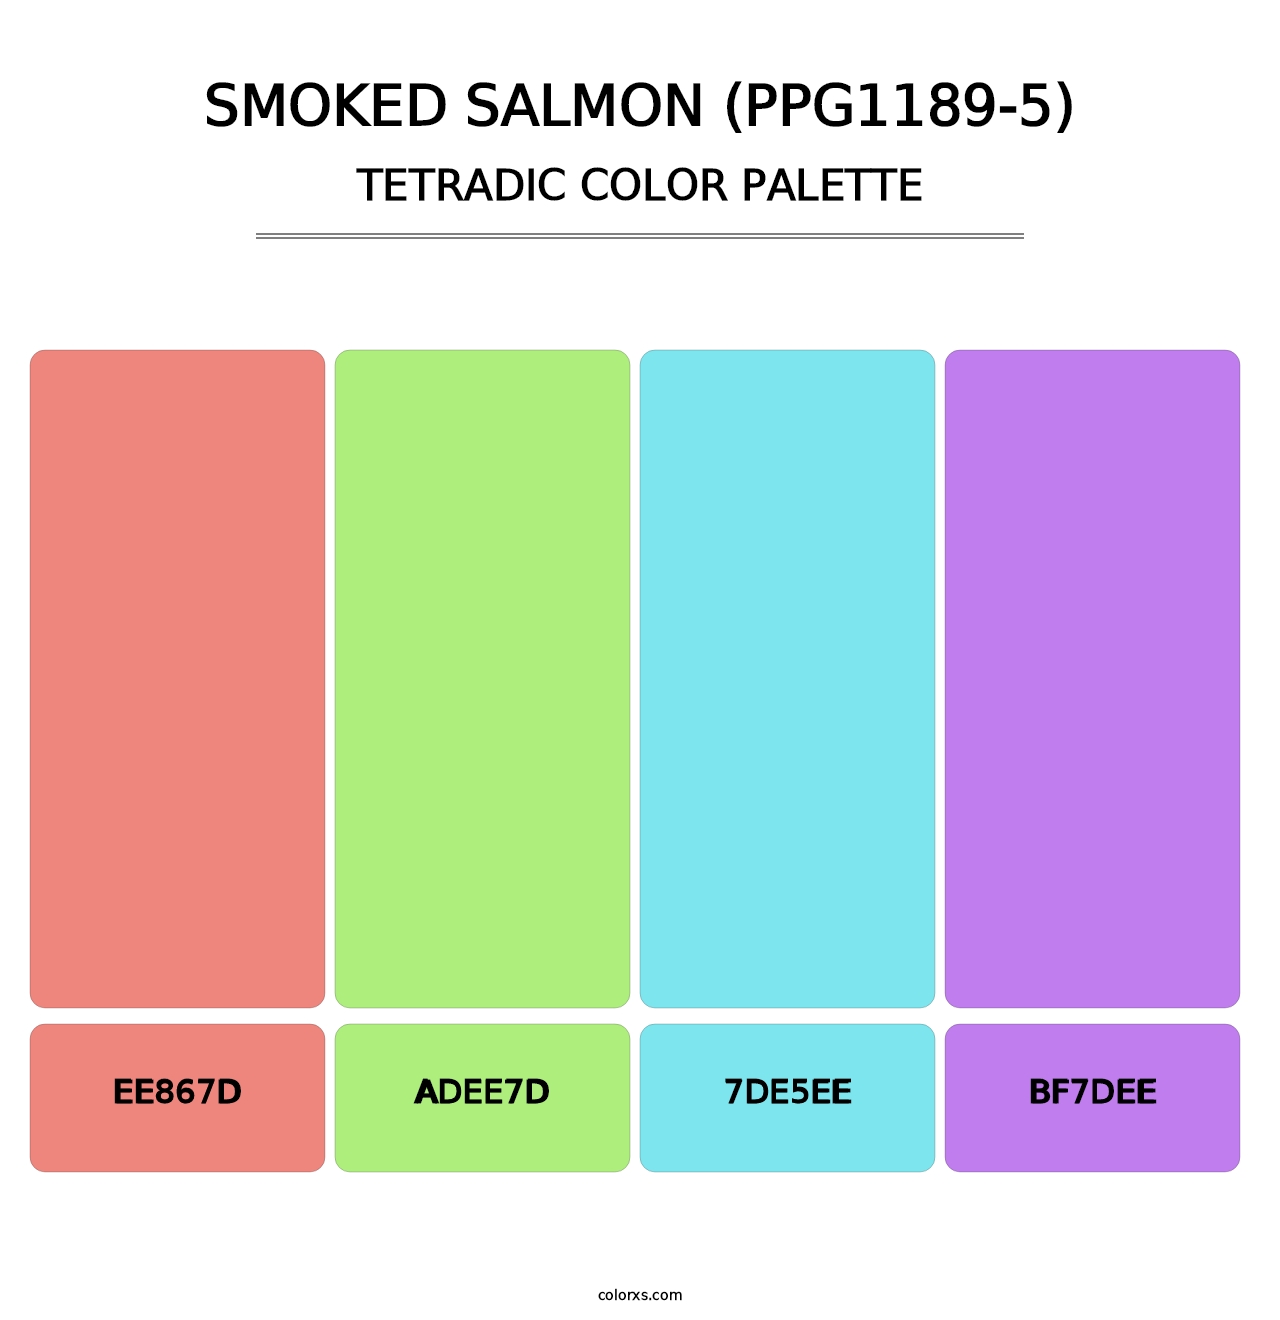 Smoked Salmon (PPG1189-5) - Tetradic Color Palette